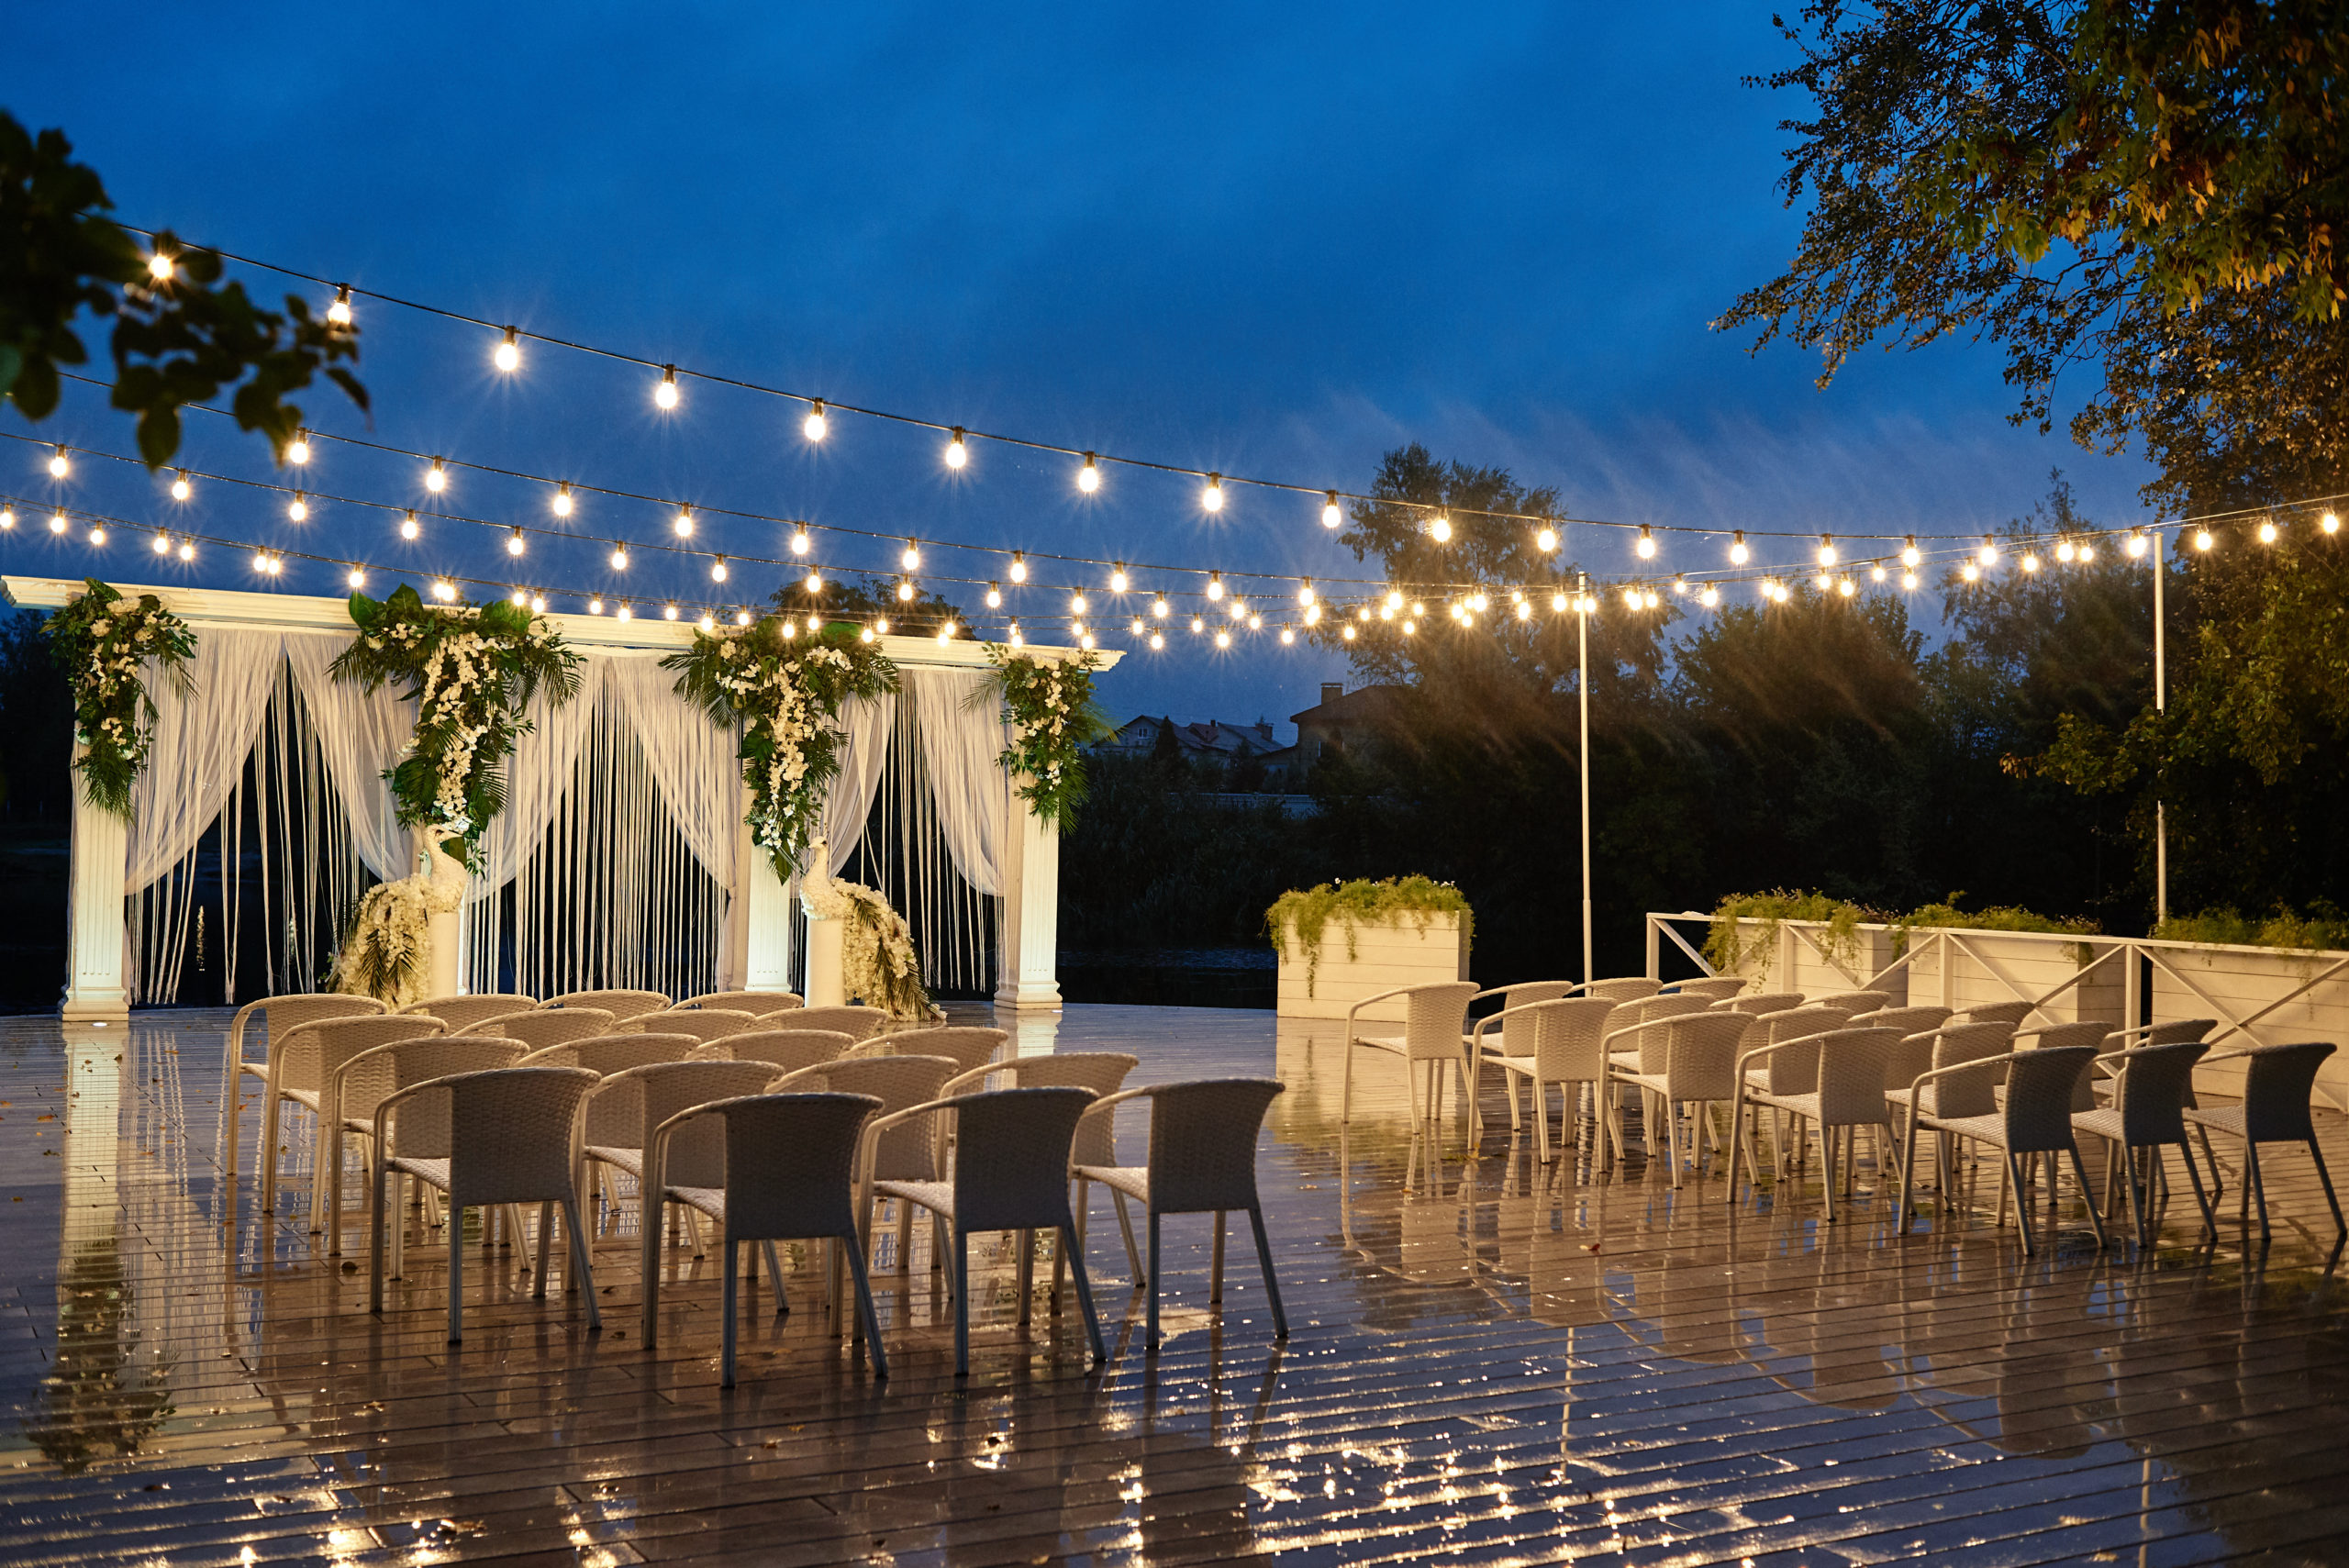 Night wedding ceremony with arch, orchid flowers, chairs and bul